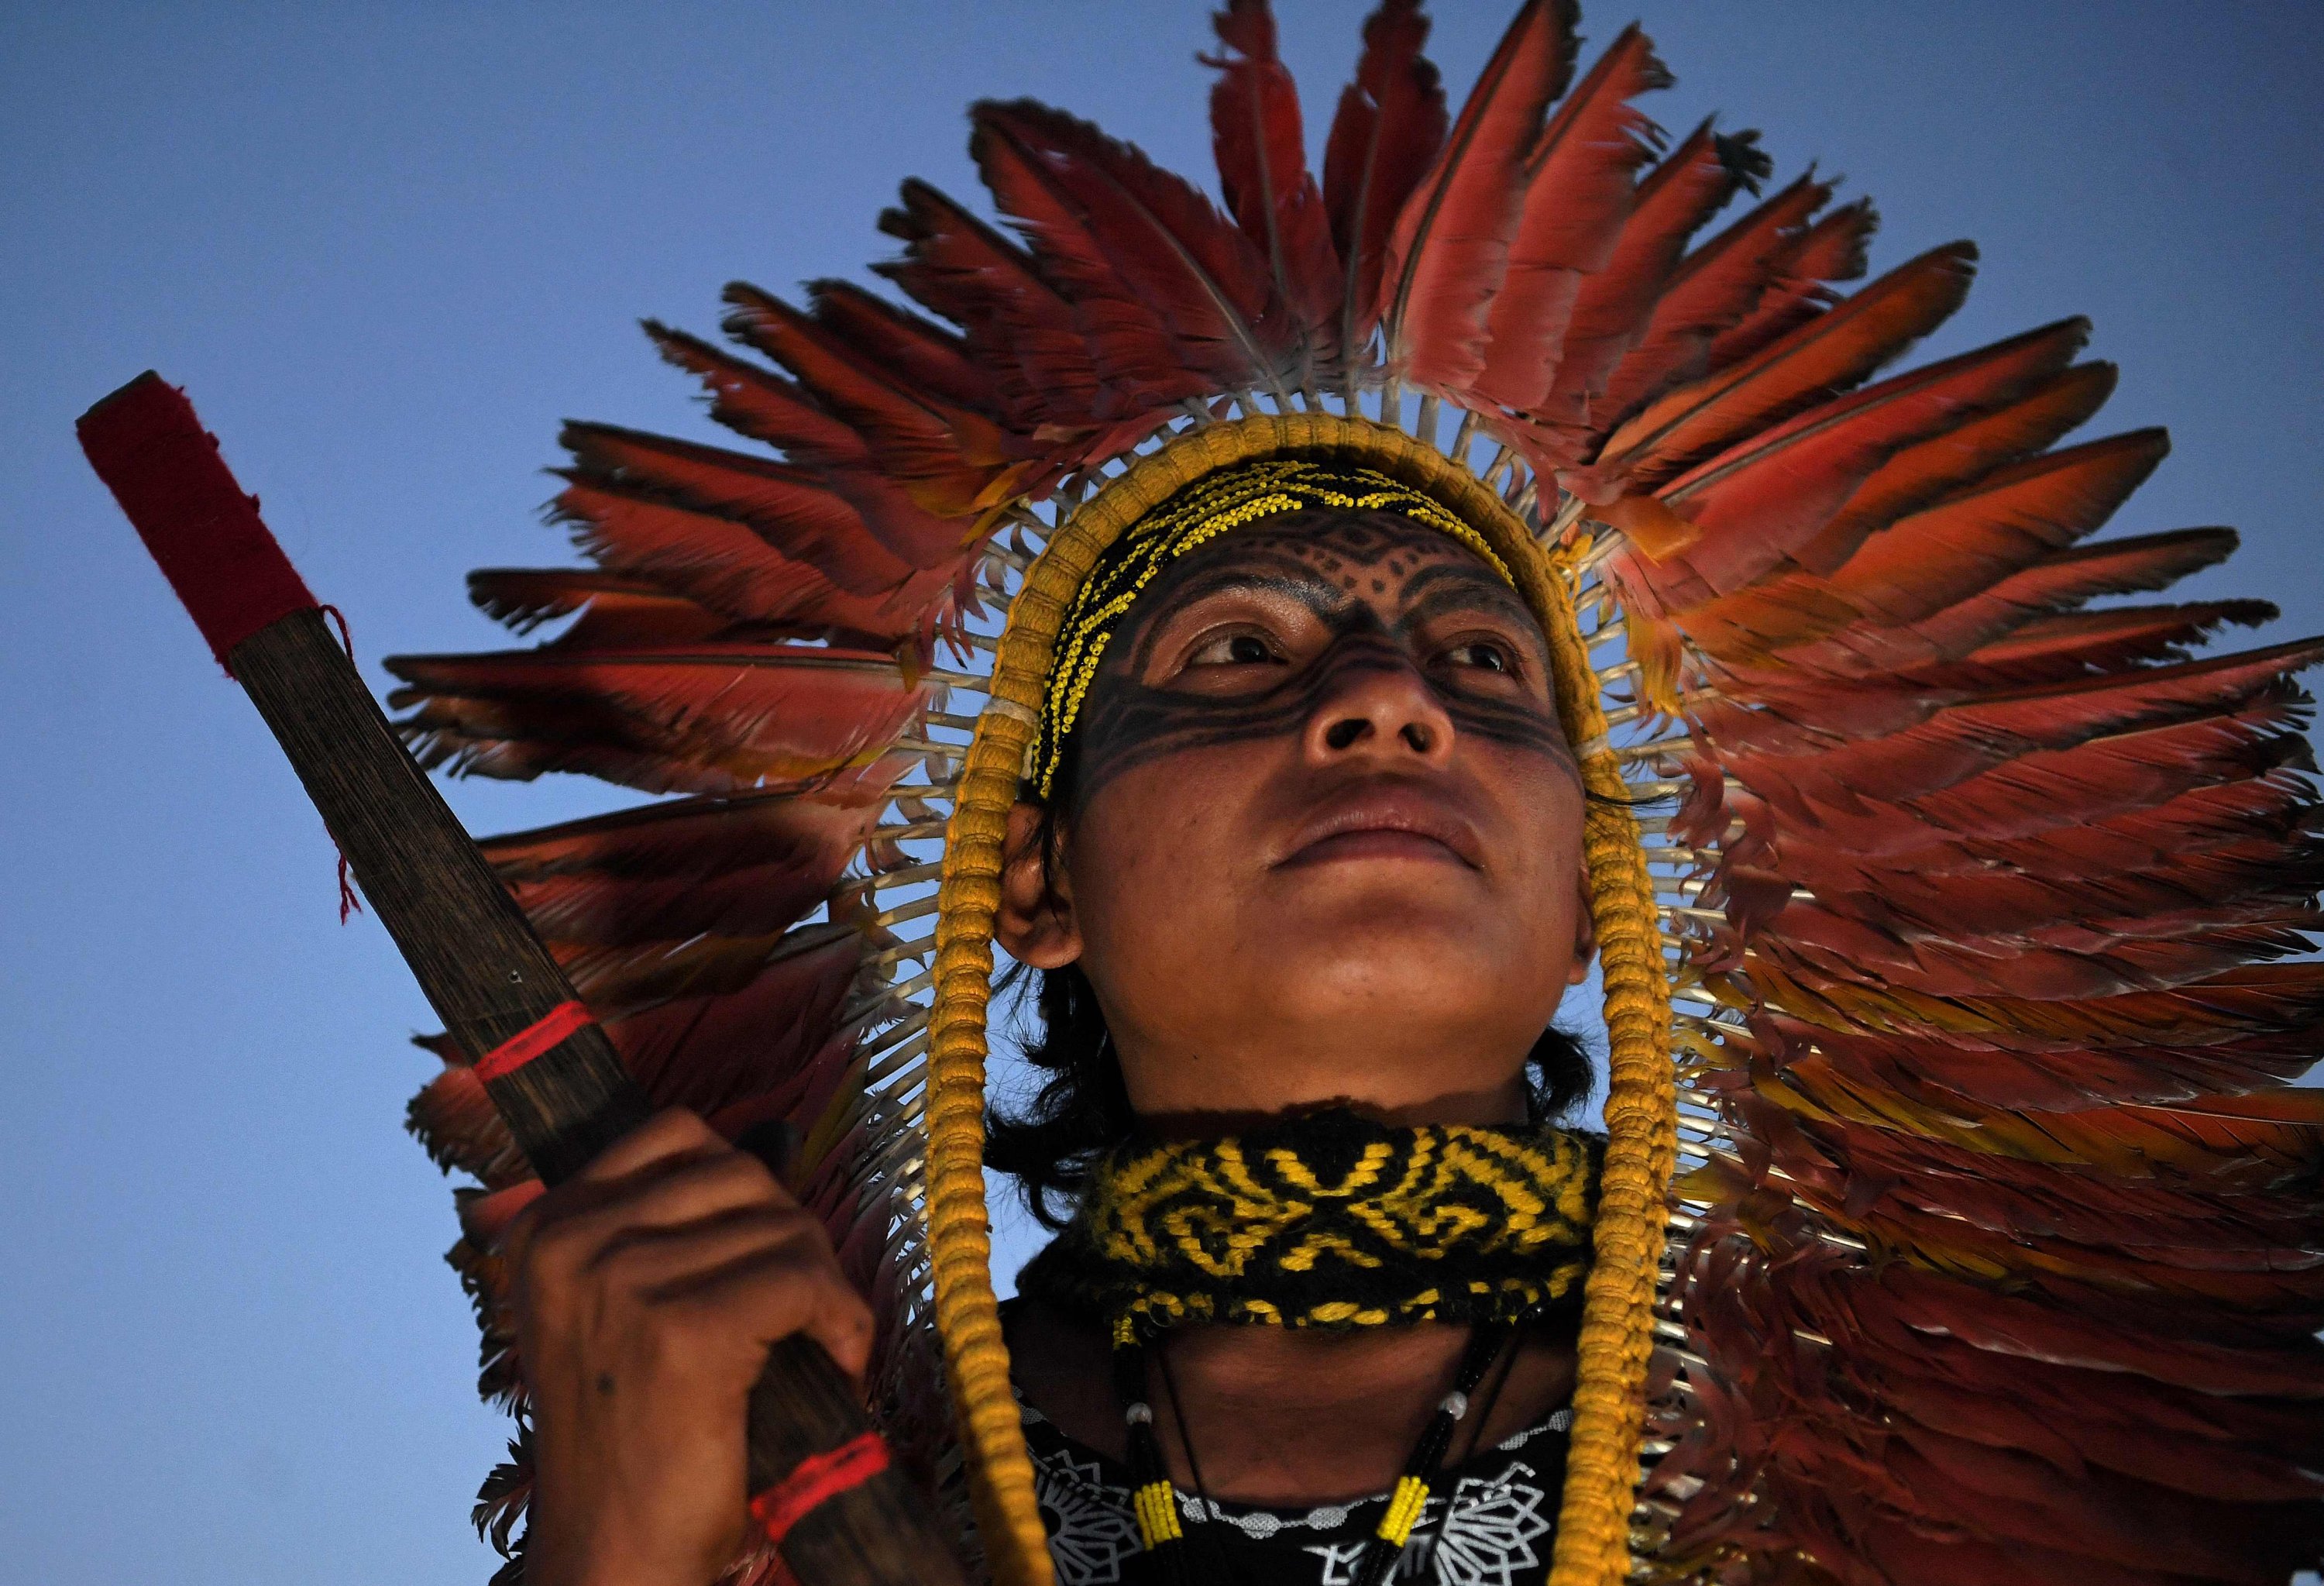 A member of the Huni Kuin tribe looks on during a protest camp in Brasilia, Brazil, Aug. 22, 2021. (AFP Photo)